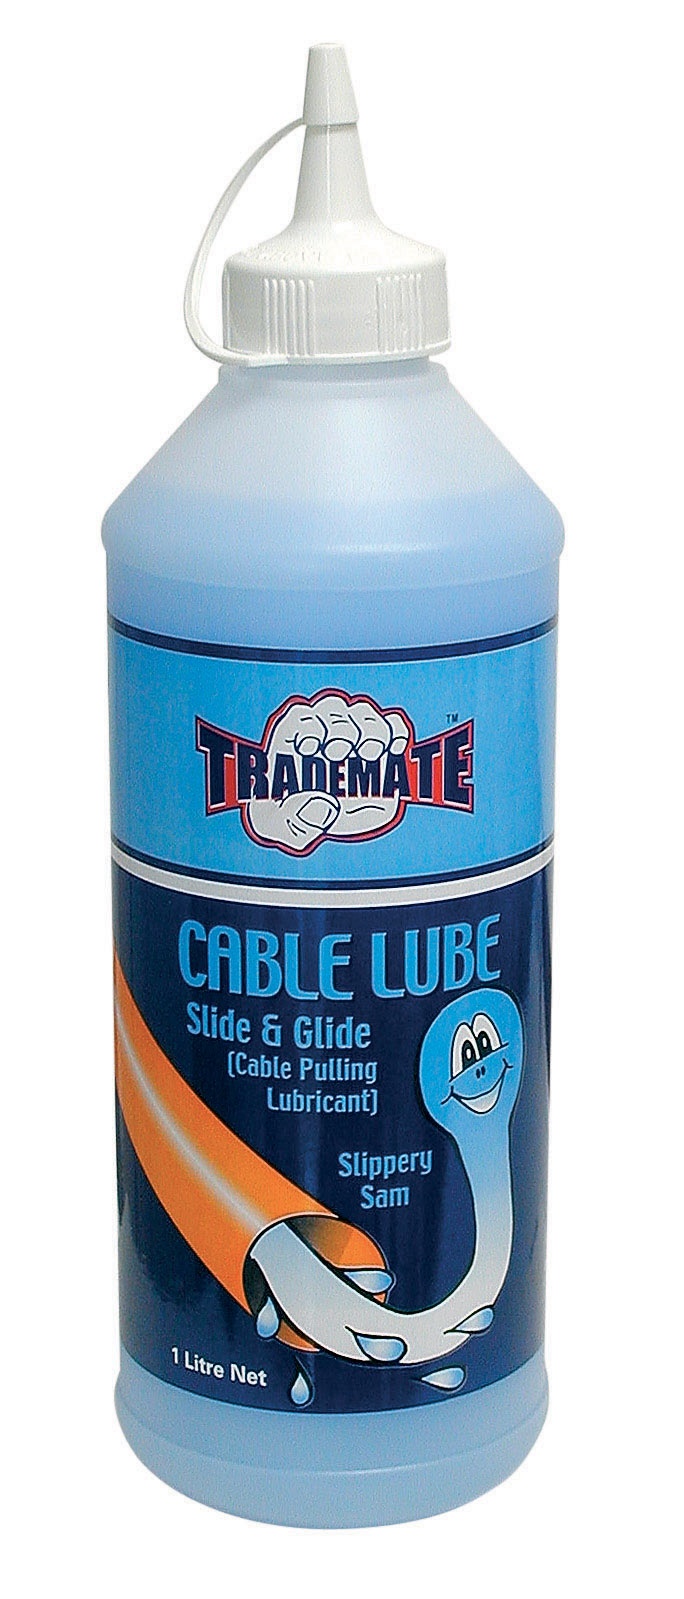 Trademate Cable Lubricant Type G 1 Litre Aqualube